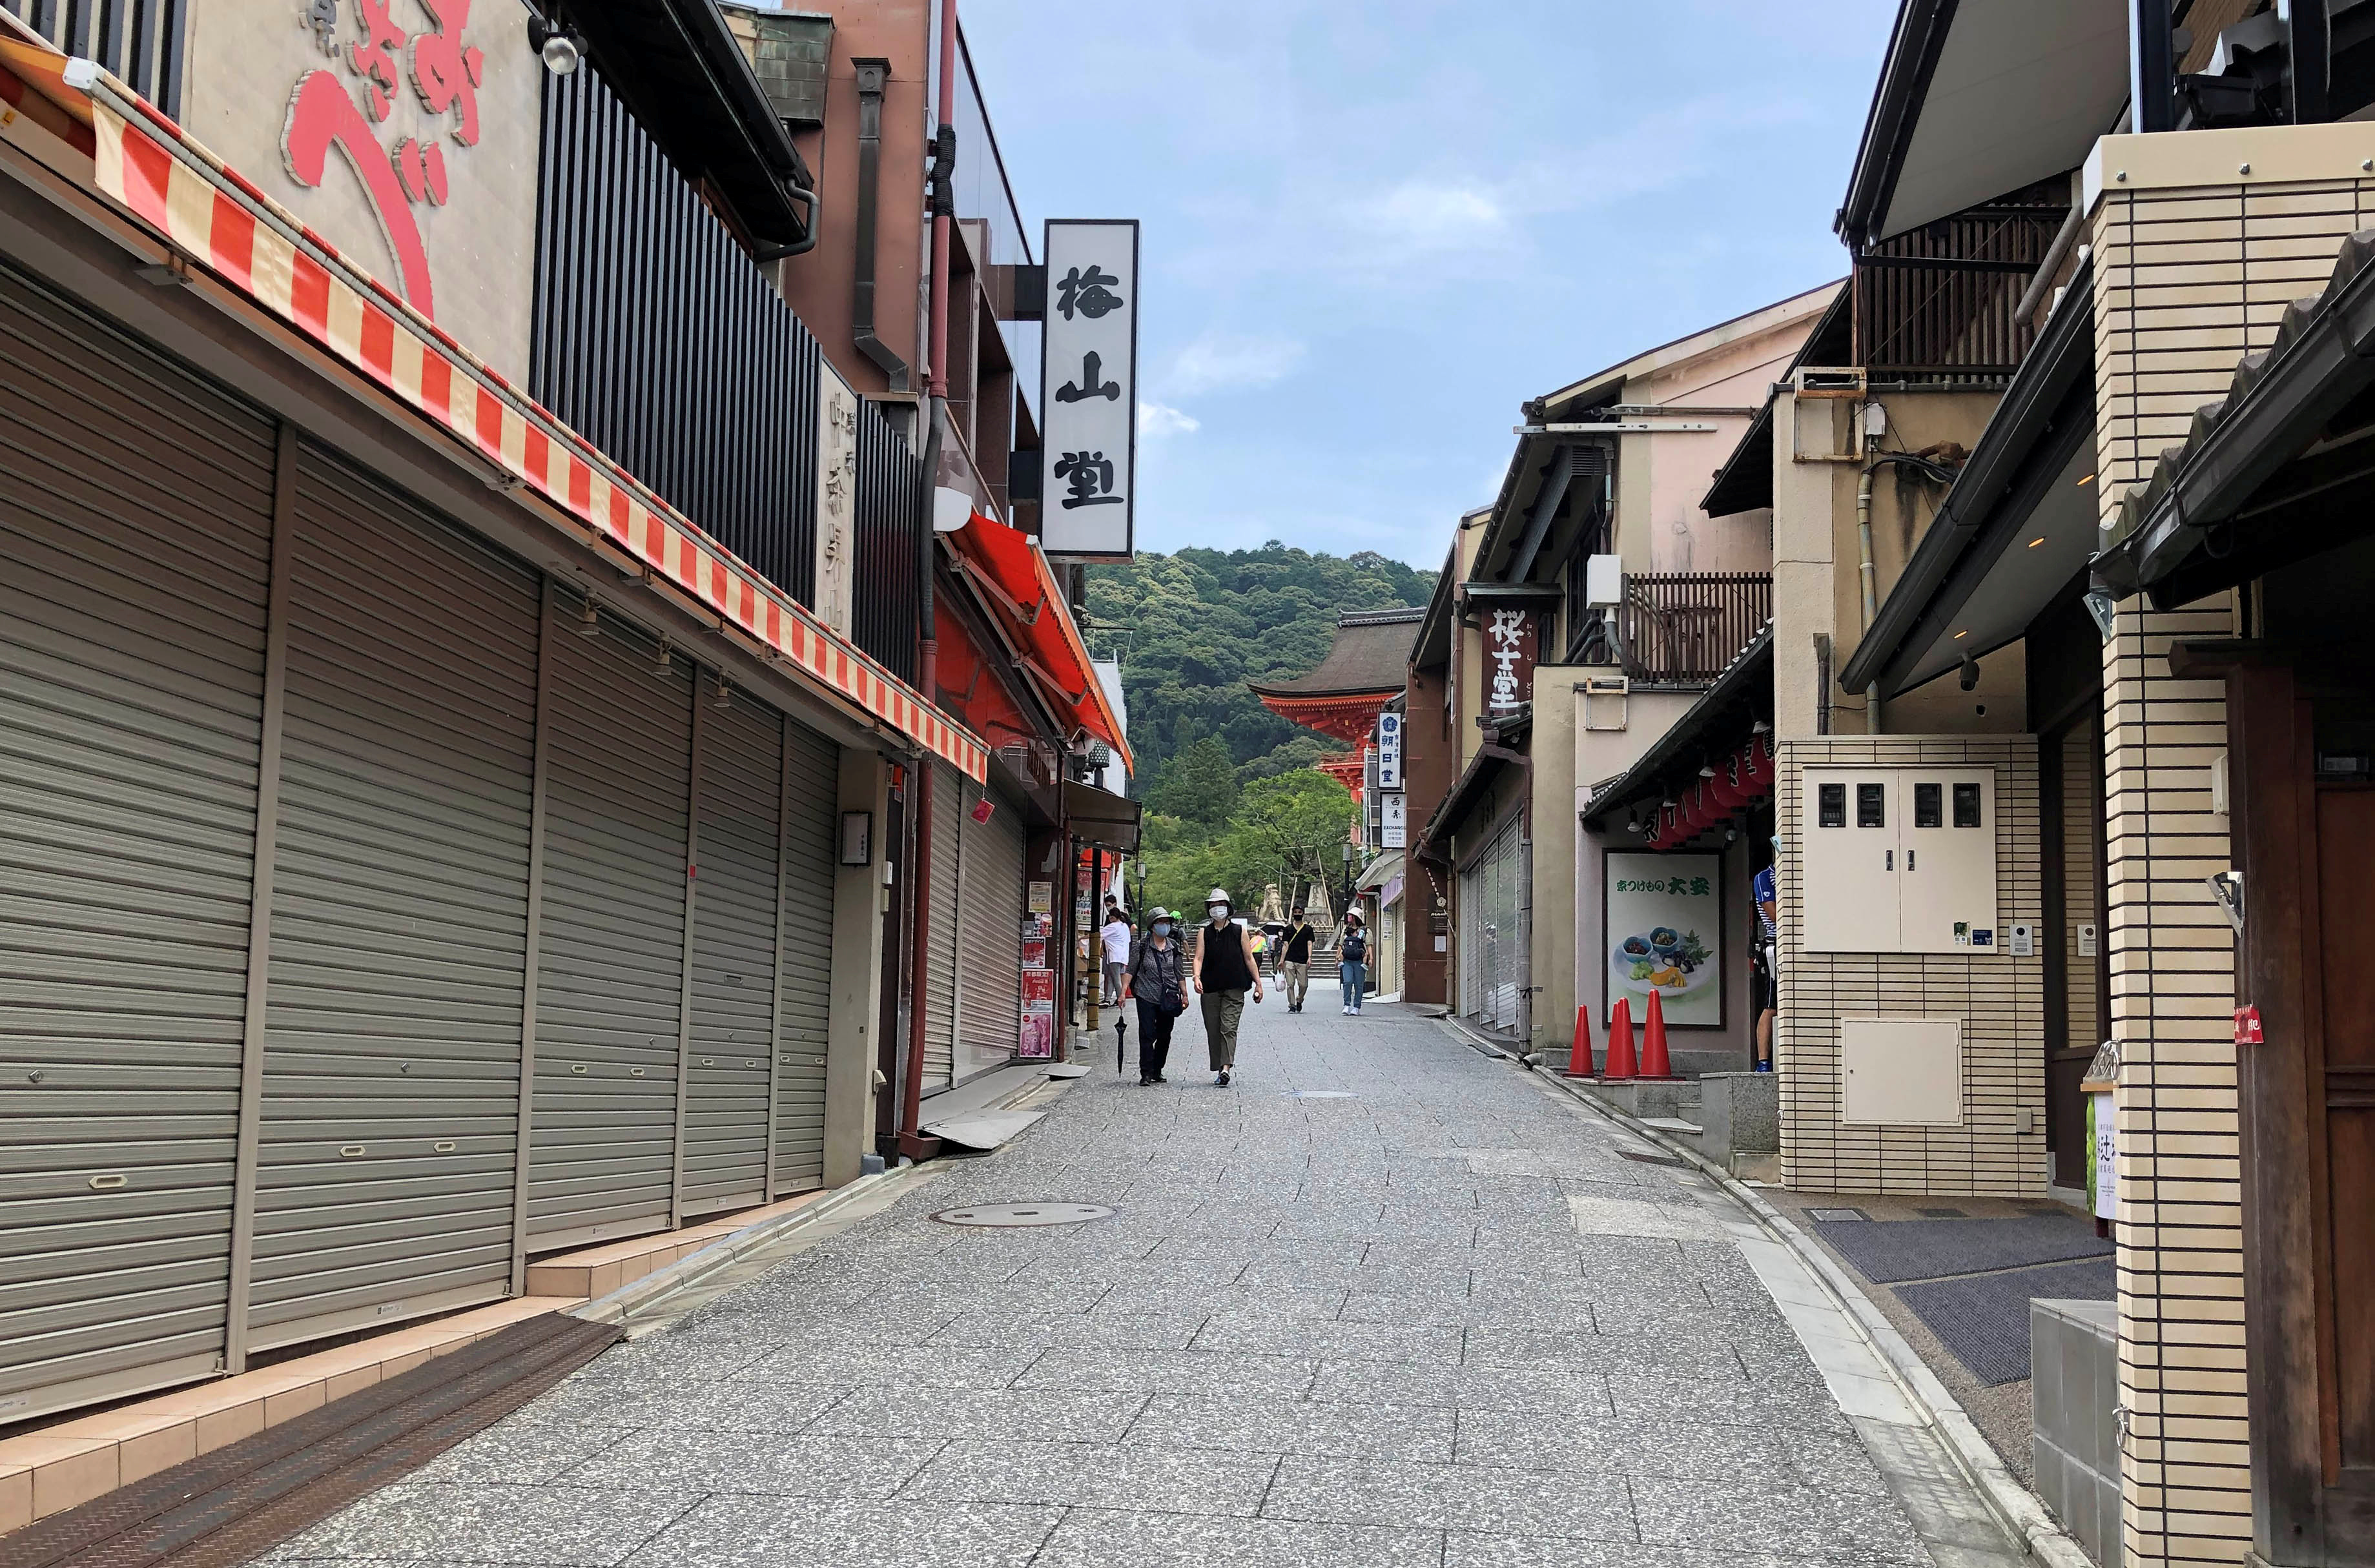 An empty street near the usually crowded Kiyomizu temple in Kyoto, a popular tourist attraction, is pictured amid the coronavirus (COVID-19) outbreak in Japan, July 21, 2020. REUTERS/Leika Kihara